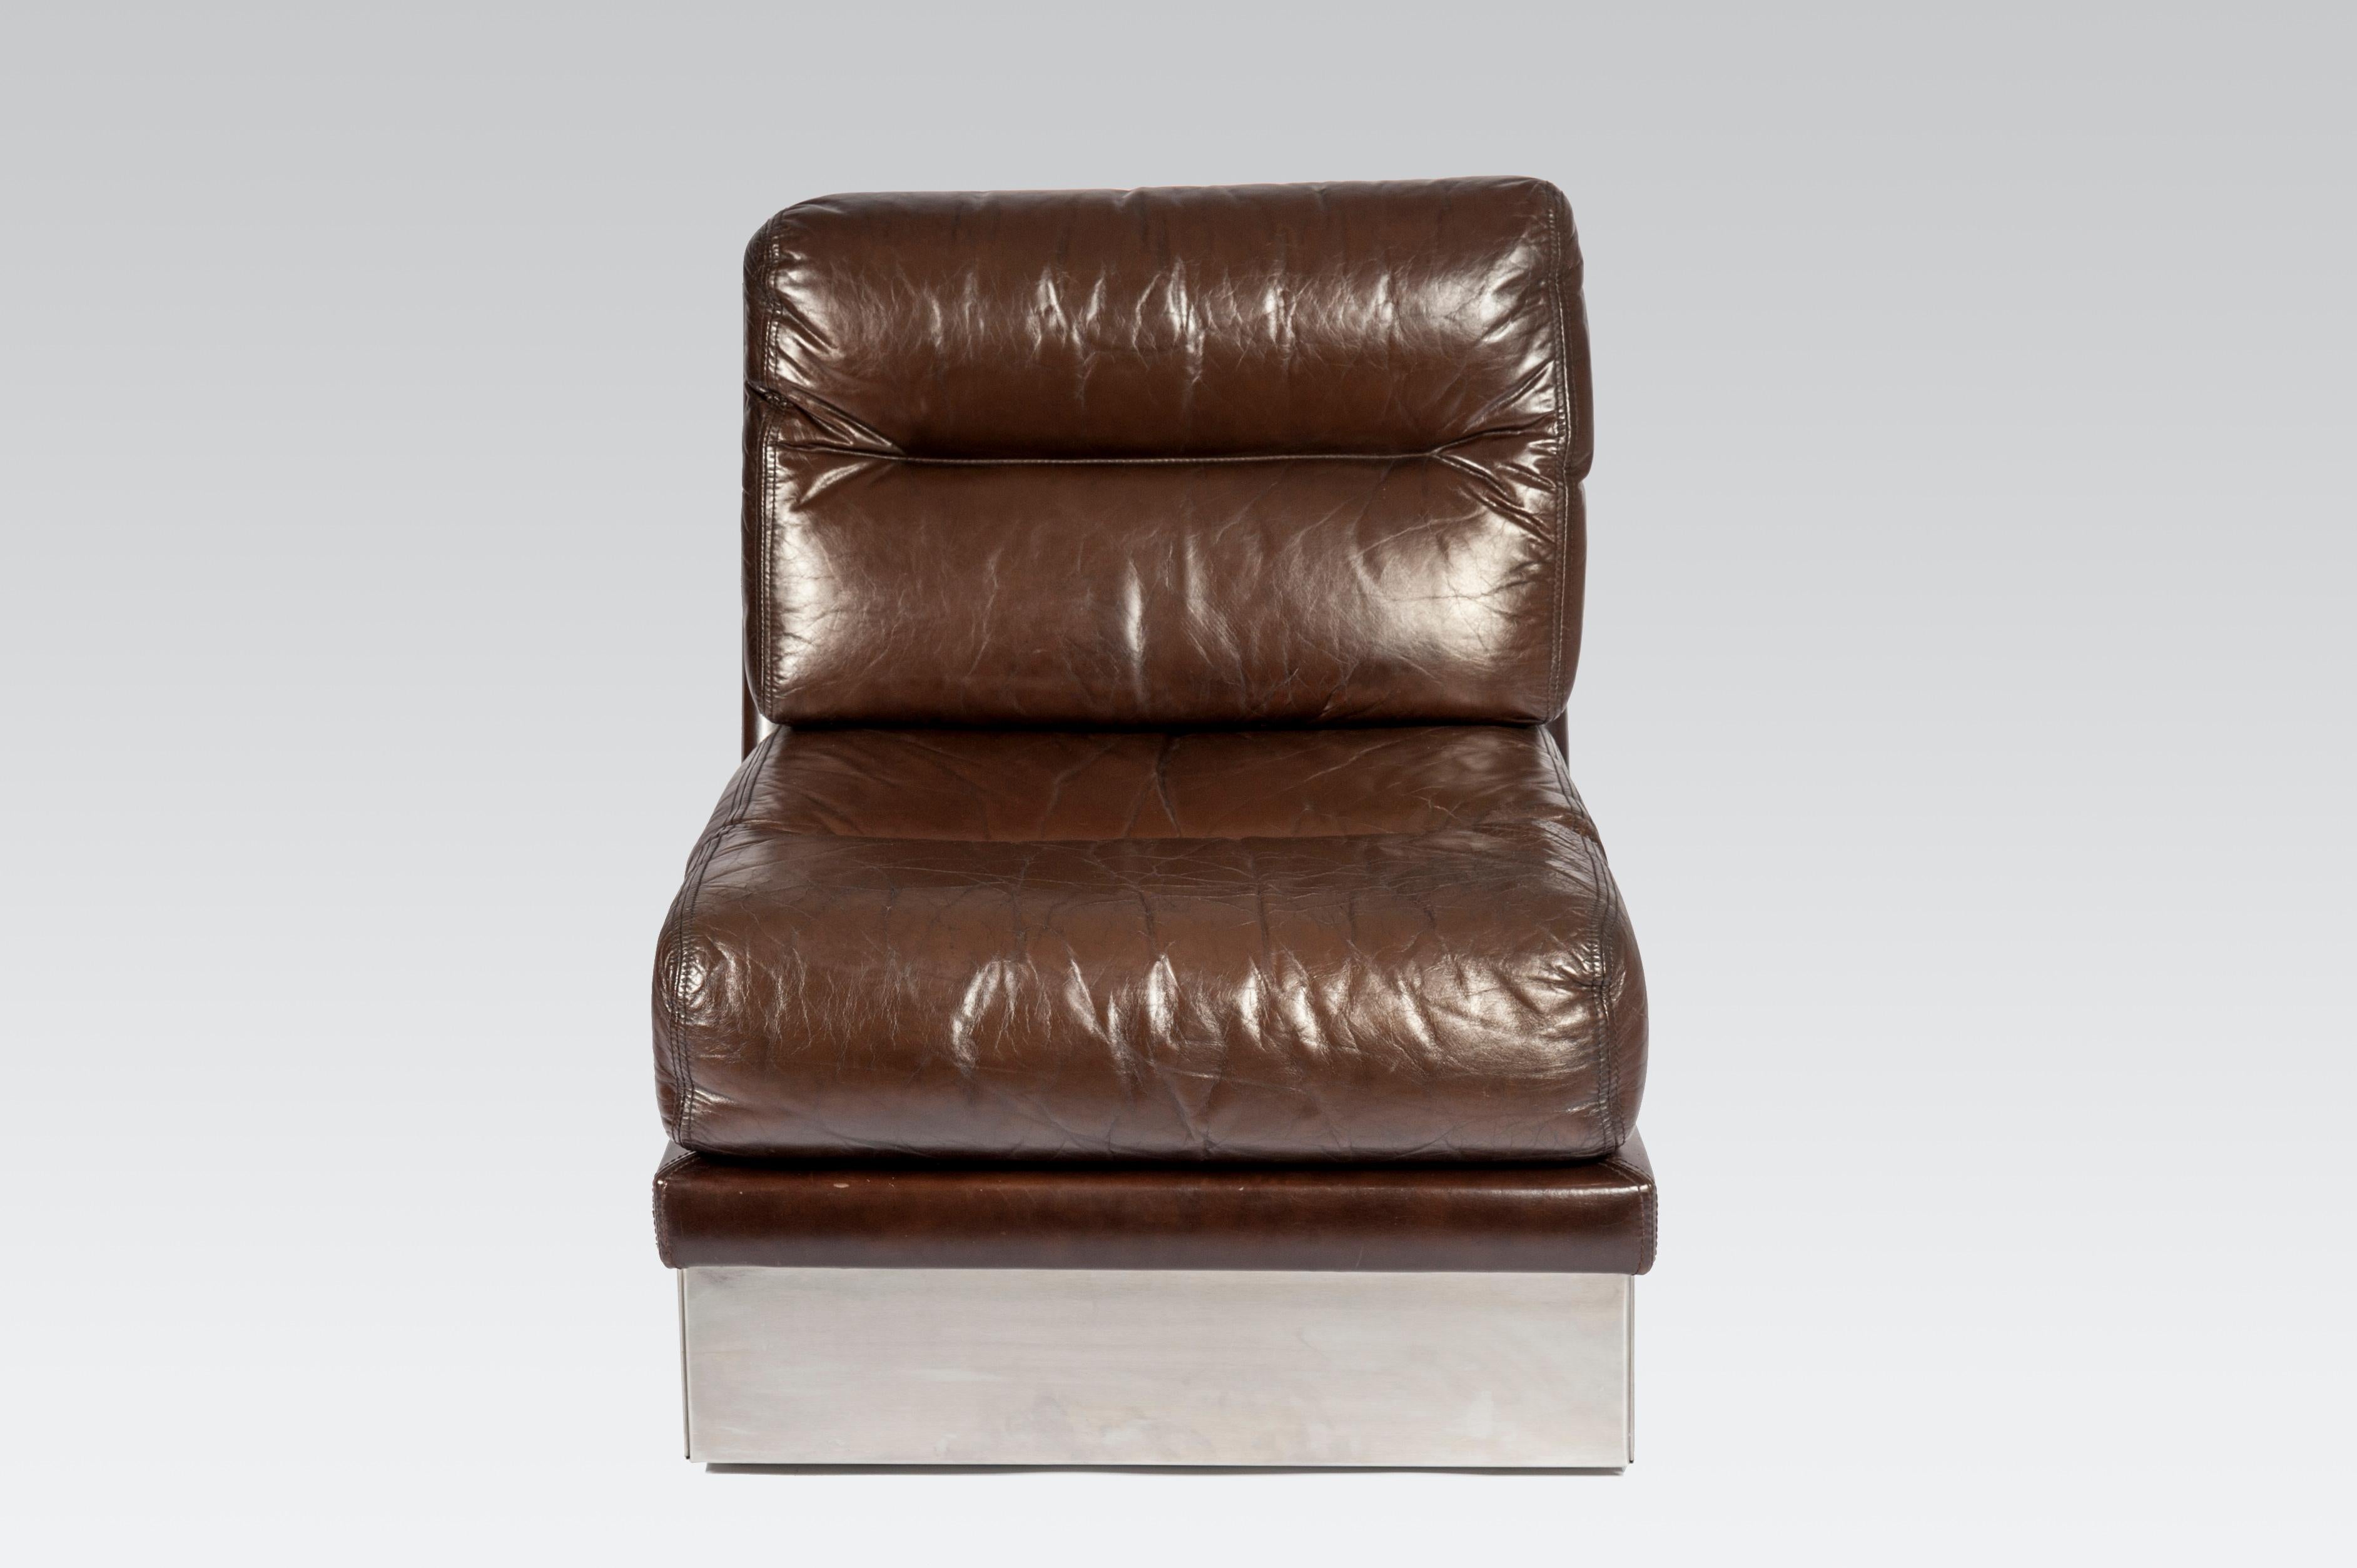 Pair of Single seat or double seats in brown leather and stainless steel by Jacques Charpentier for Roche Bobois, circa 1970.
Possibility for a sofa of 3 seats from the same set.